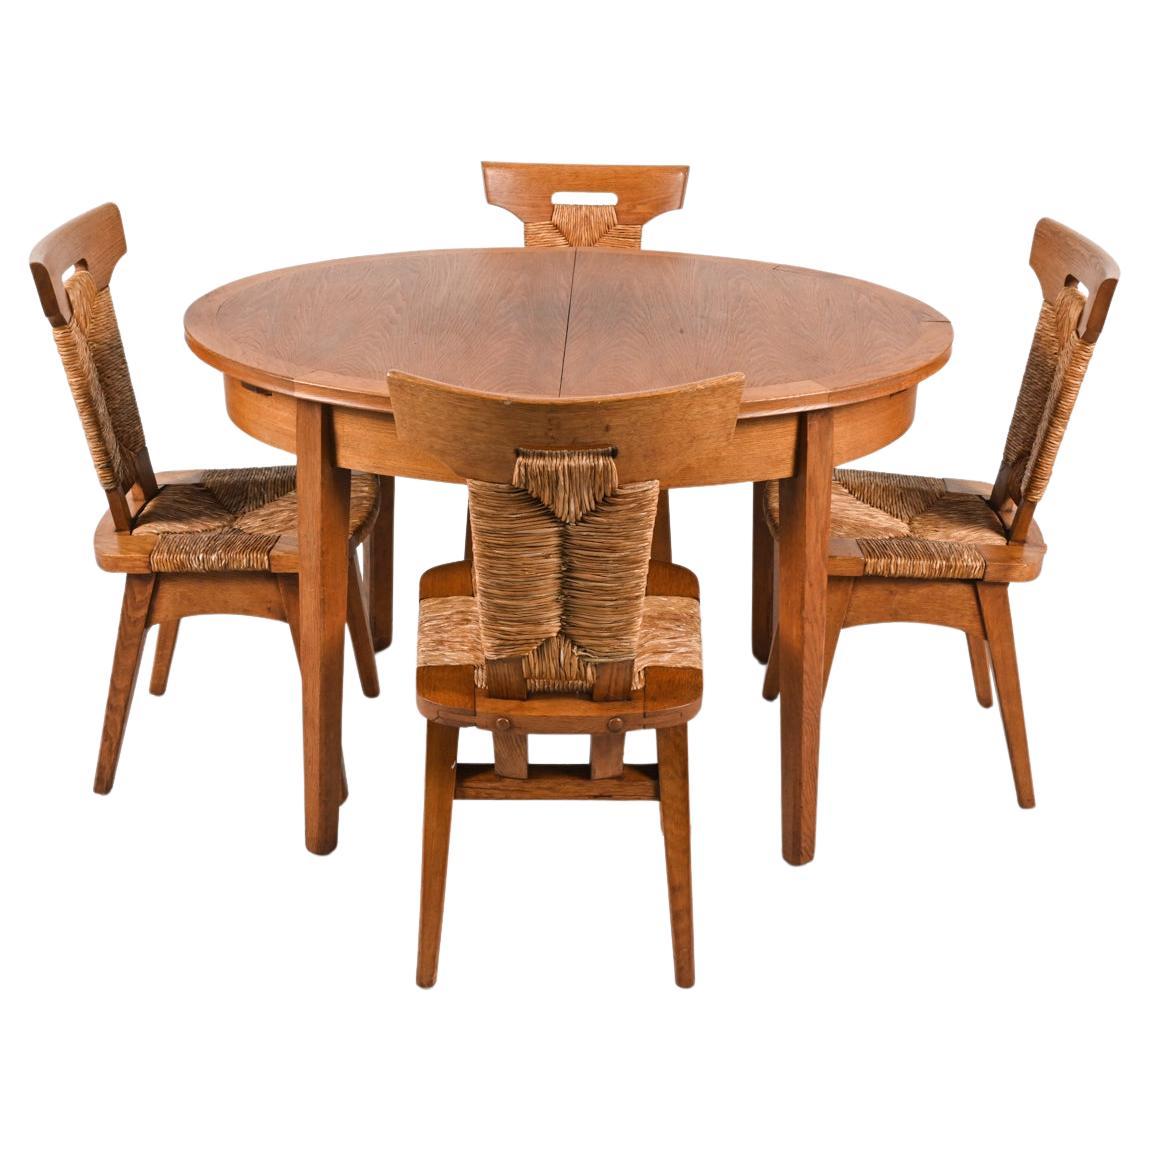 W. Kuyper Dutch Arts & Crafts Dining Suite in Oak & Rush, c. 1920s For Sale